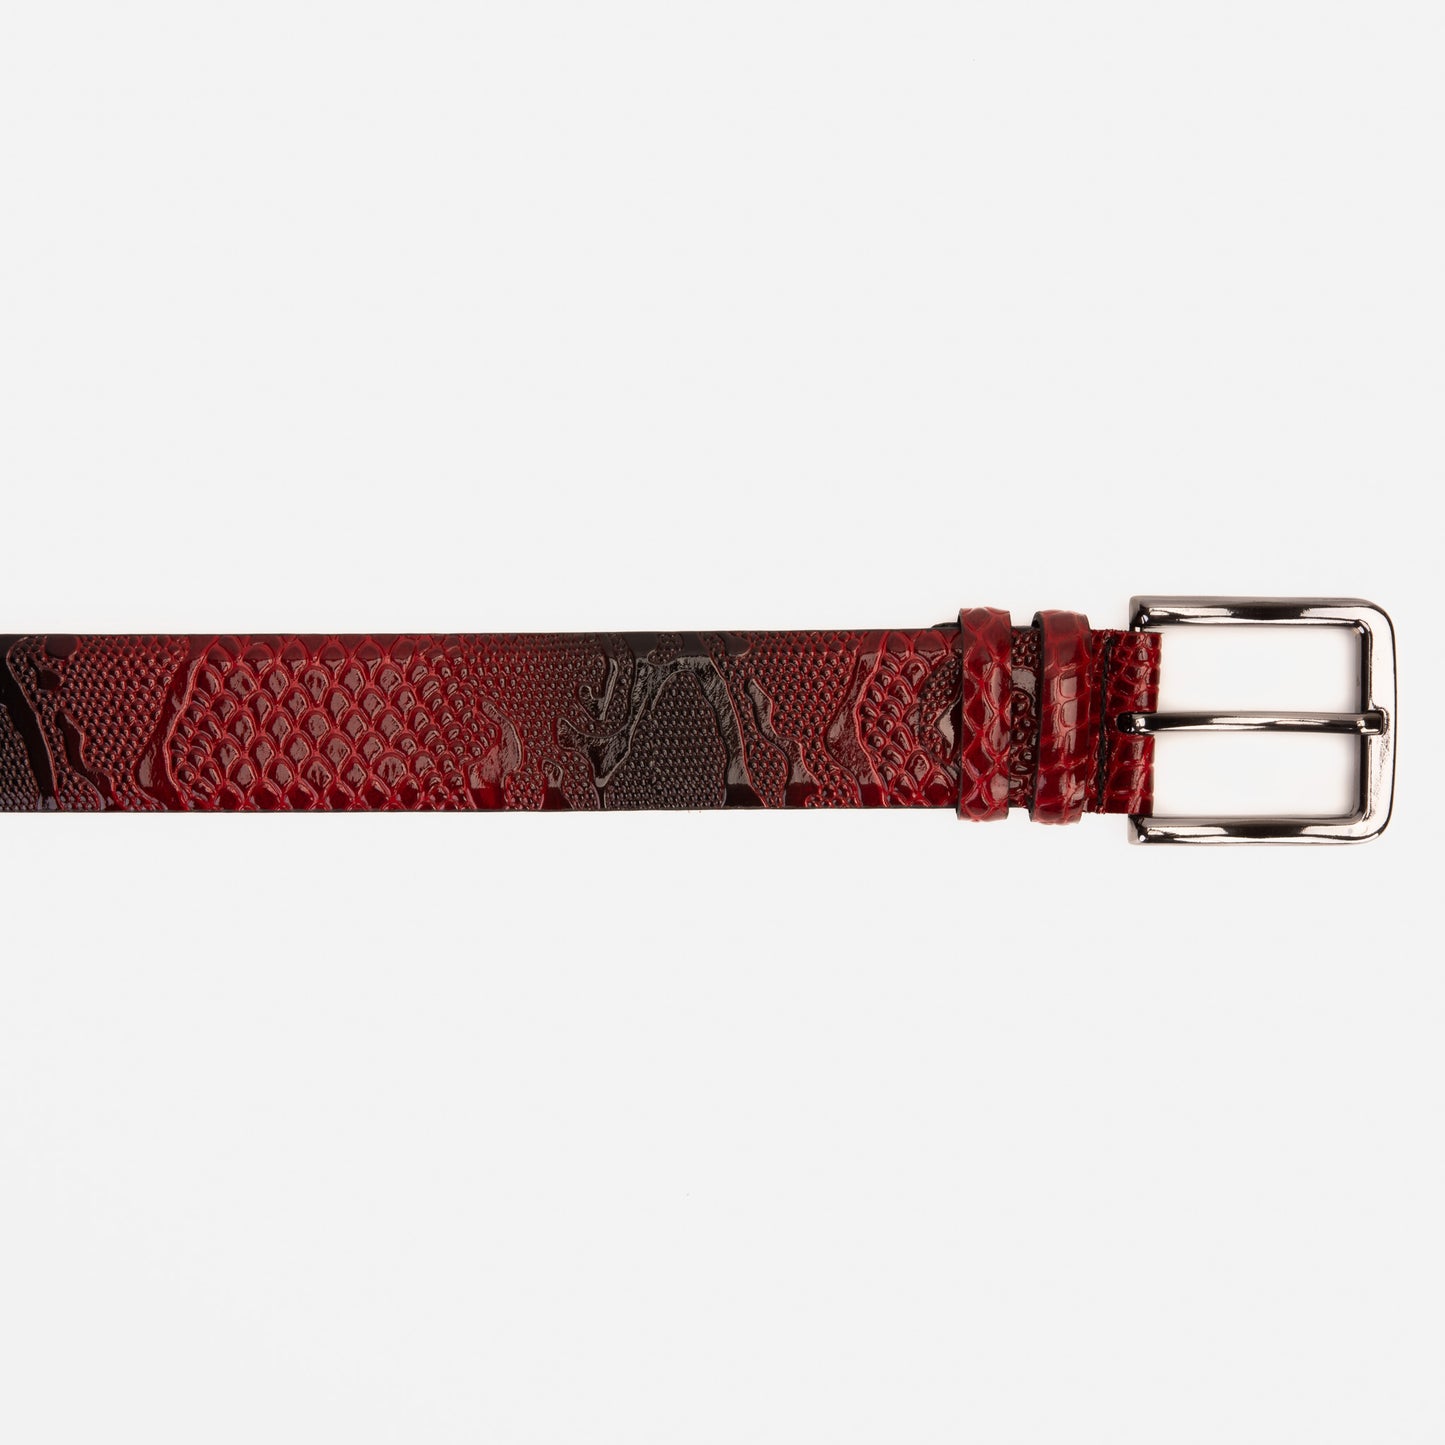 The Milano Red Leather Belt Limited Edition